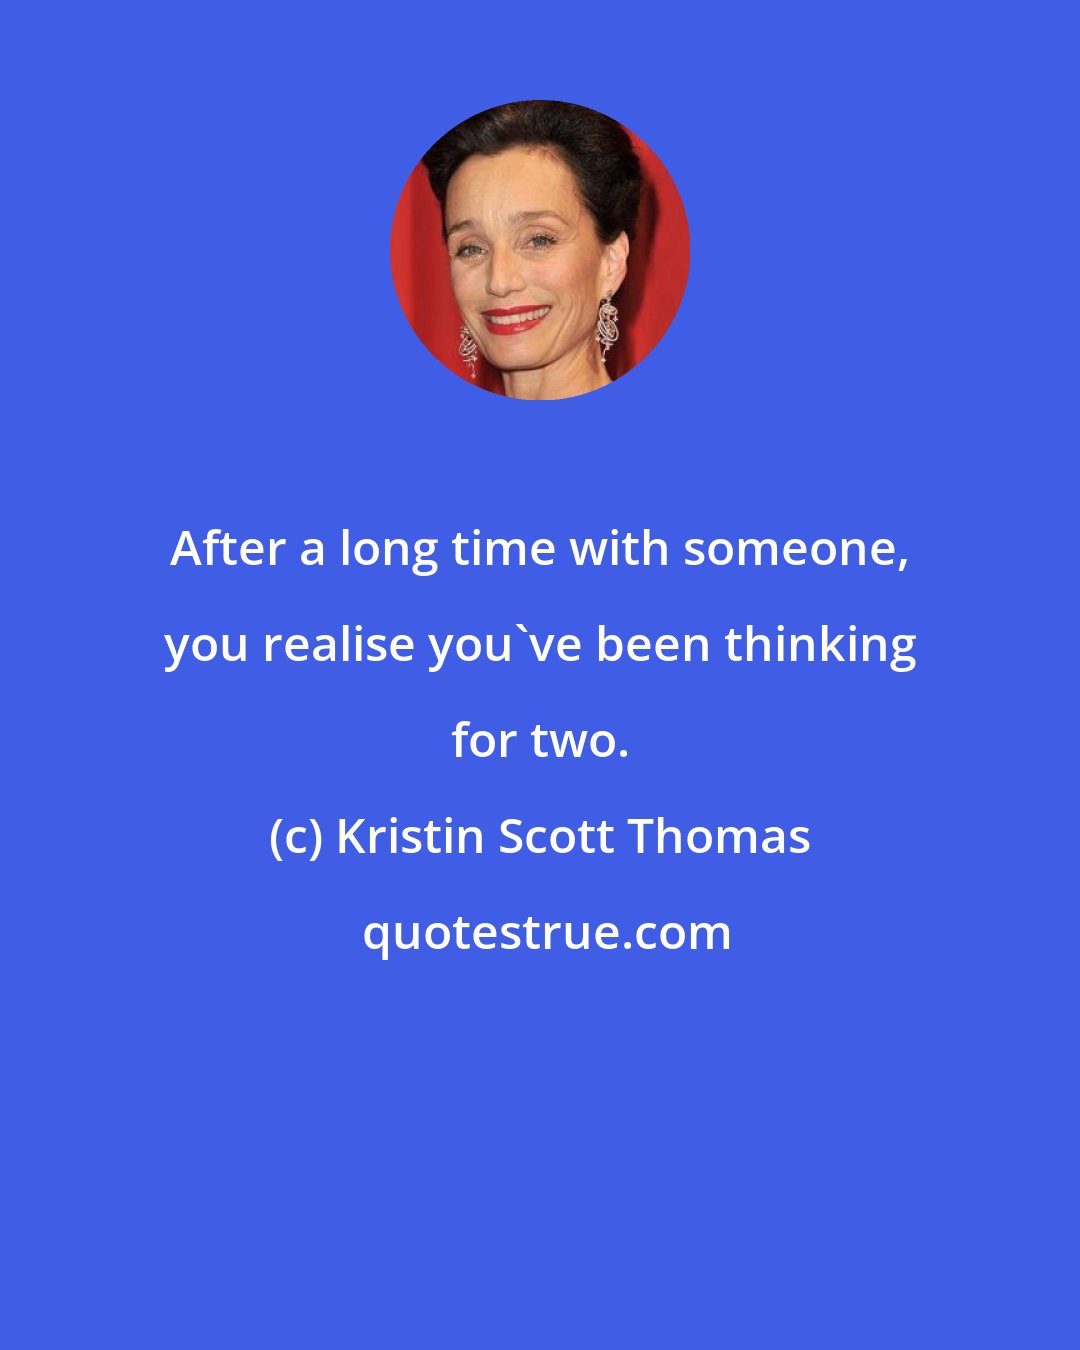 Kristin Scott Thomas: After a long time with someone, you realise you've been thinking for two.